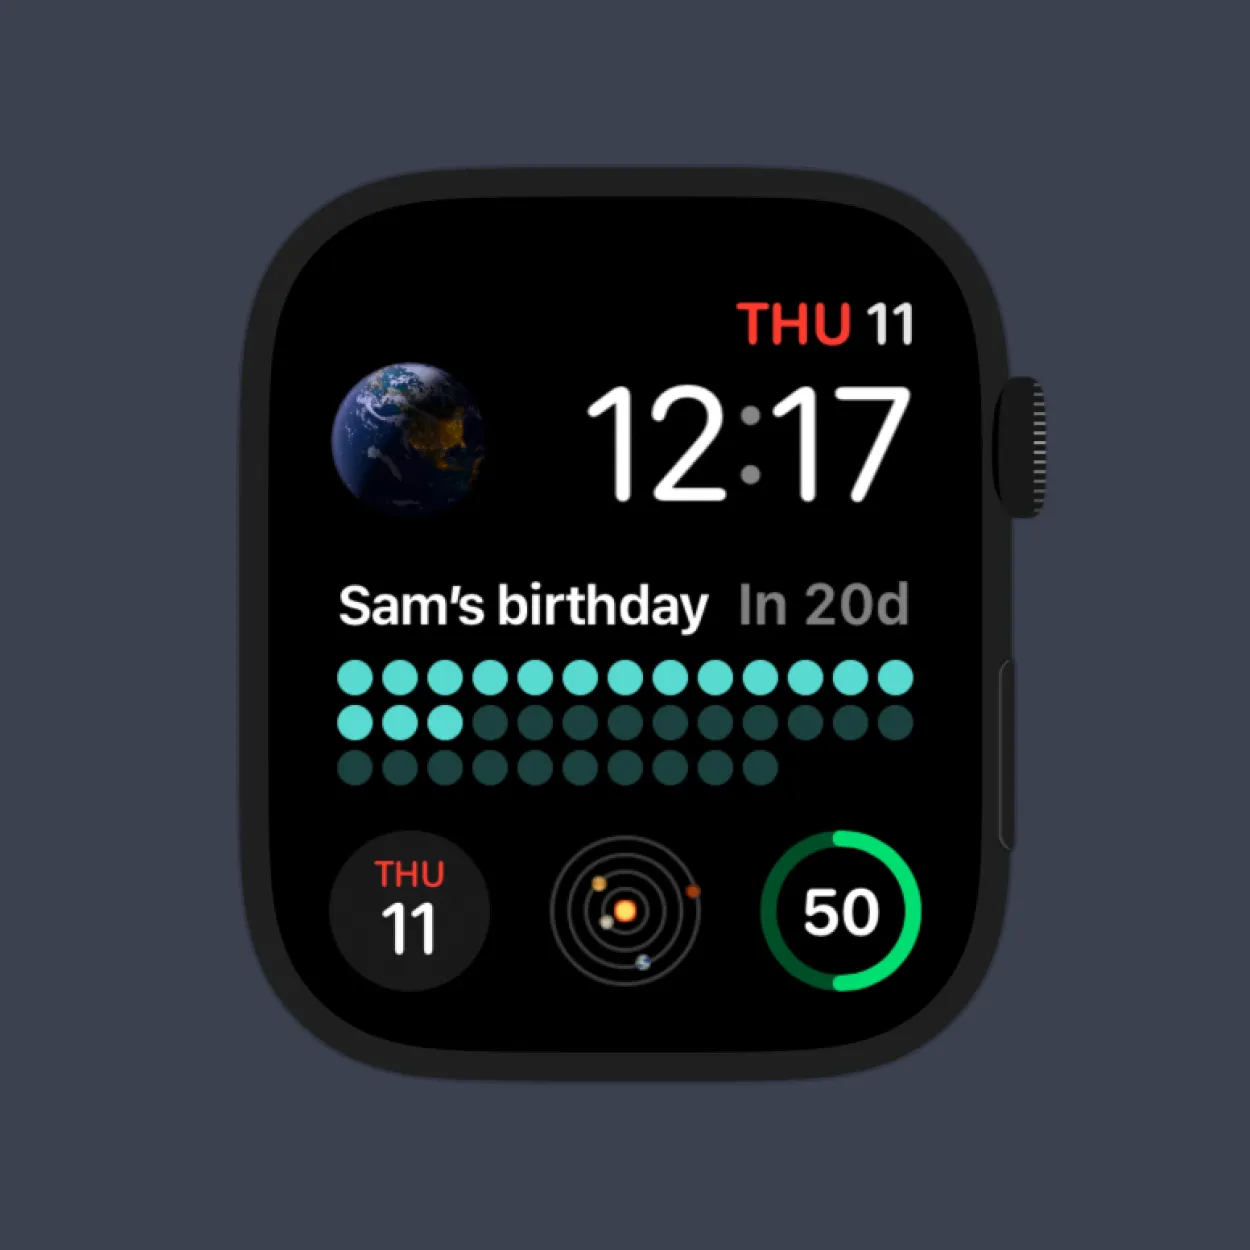 AN Apple Watch showing a birthday countdown widget on a Watch Face